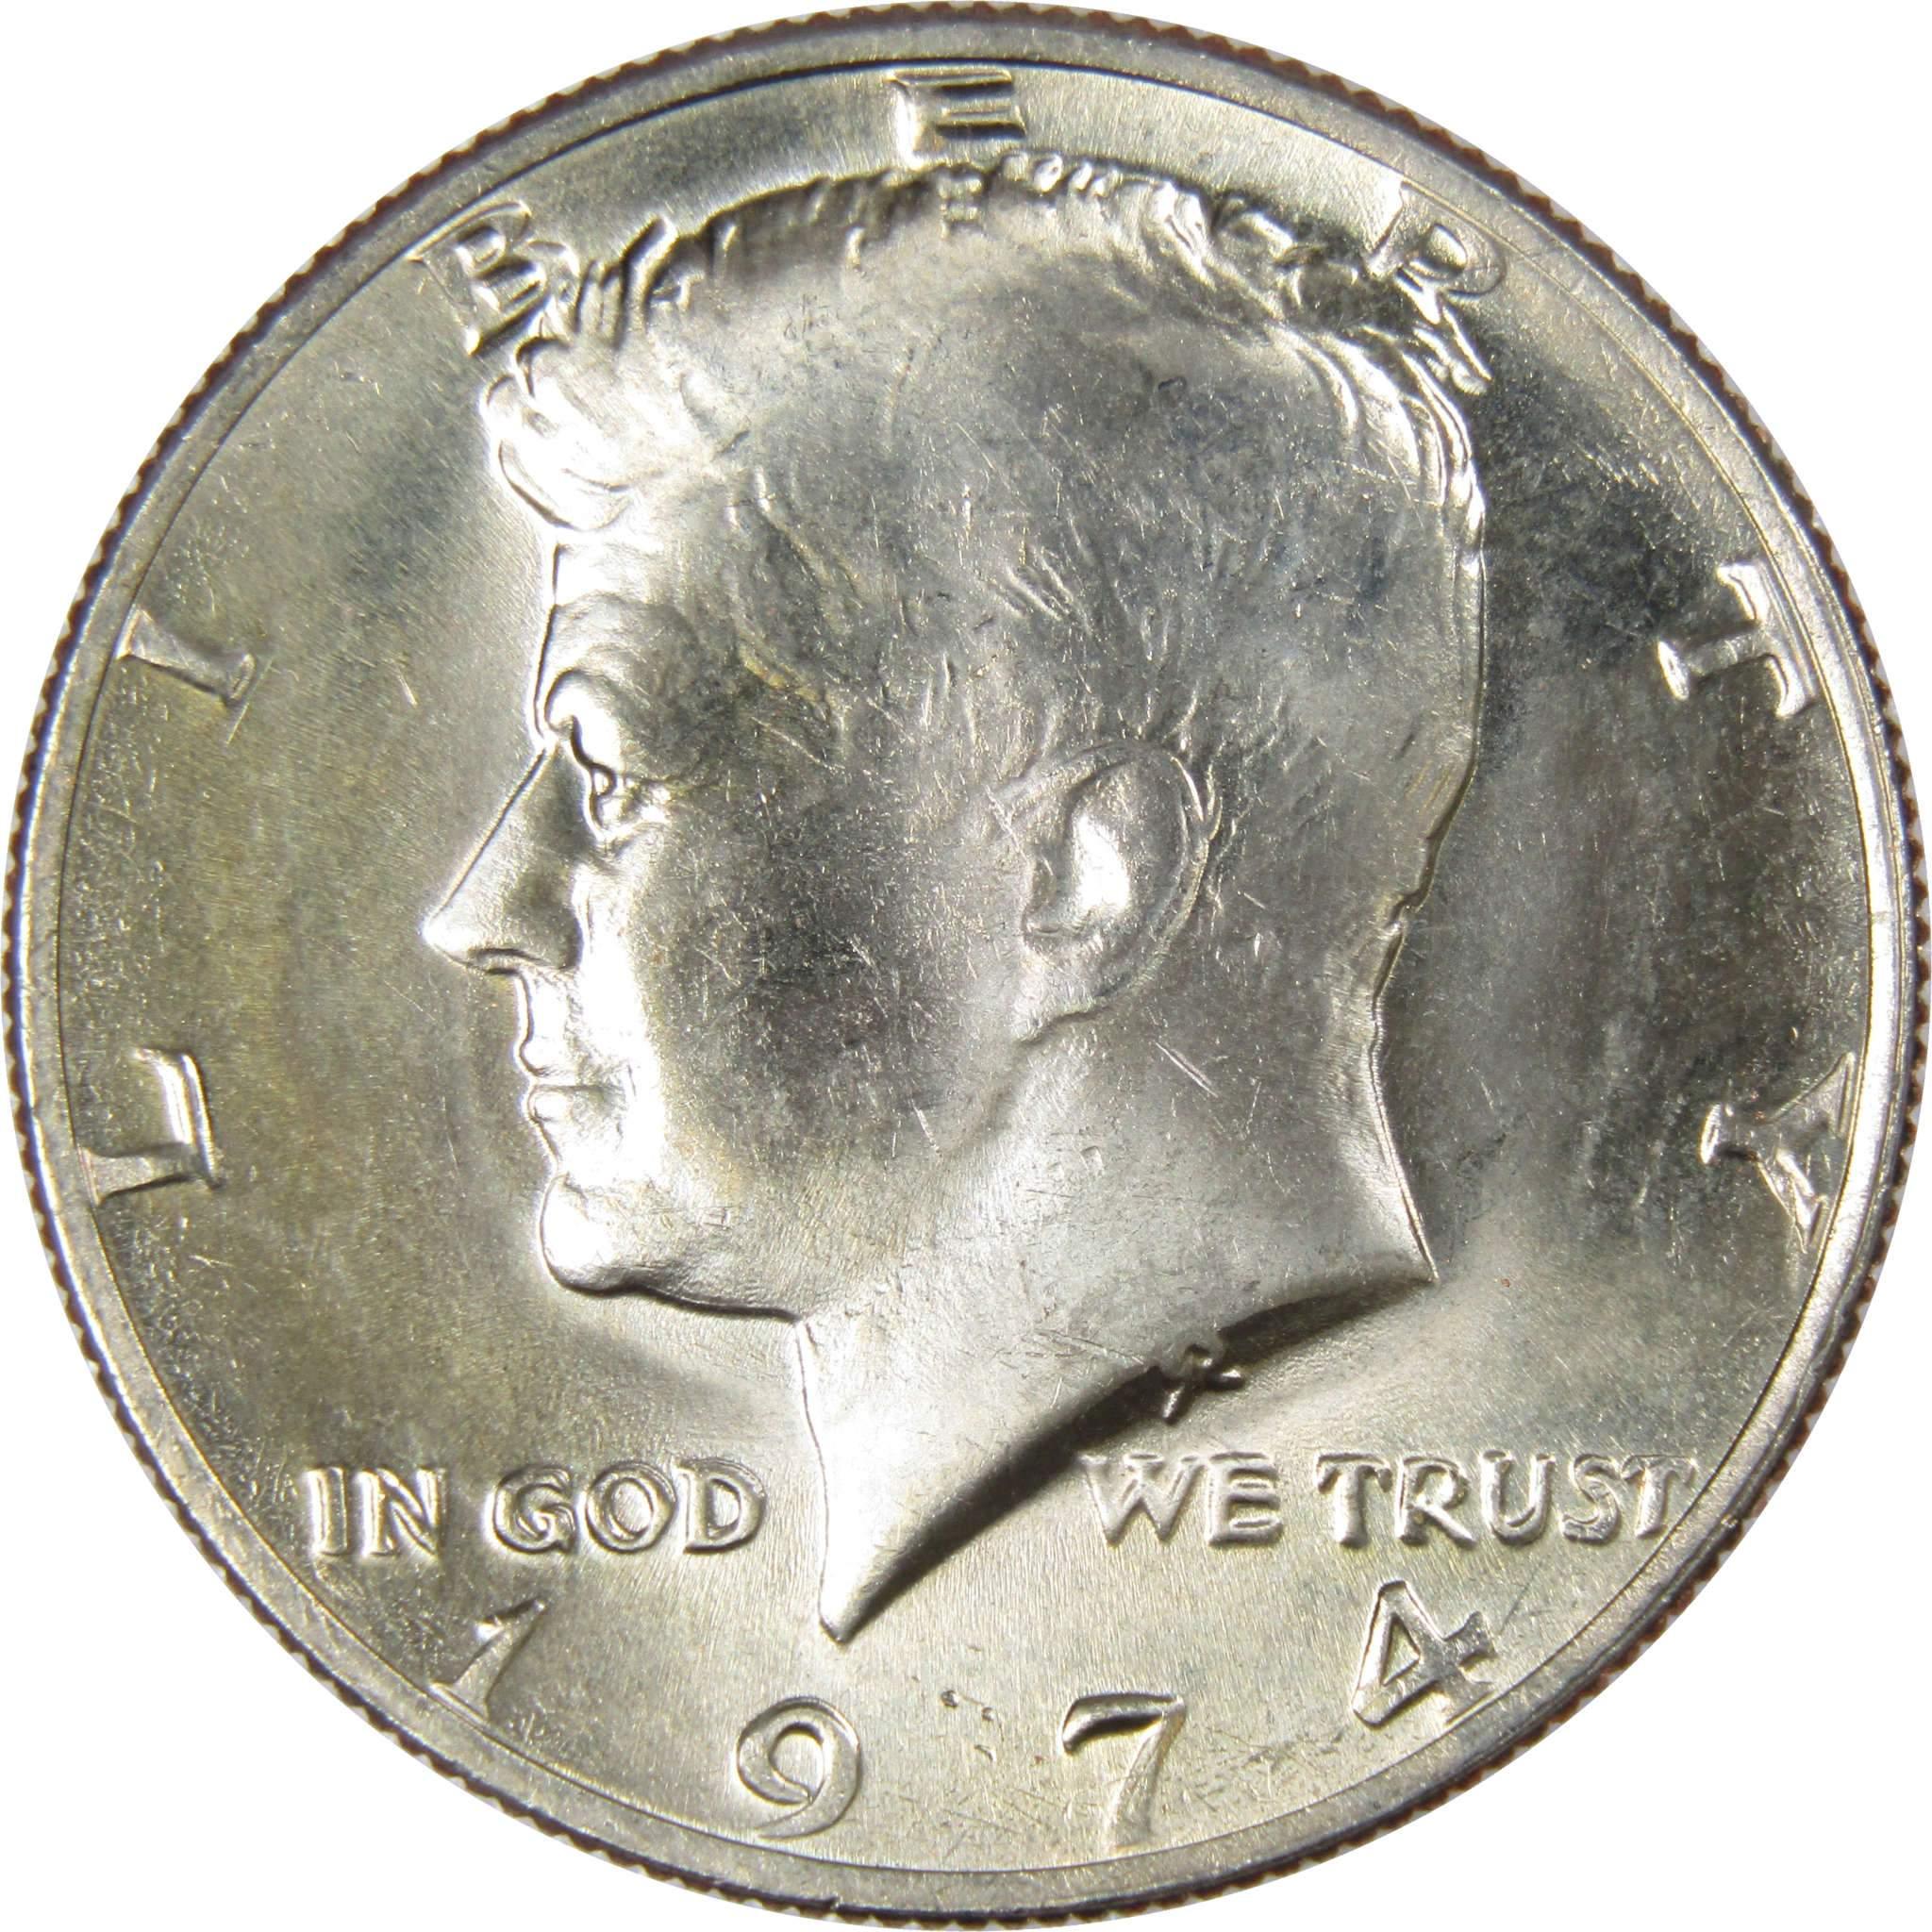 1974 Kennedy Half Dollar BU Uncirculated Mint State 50c US Coin Collectible